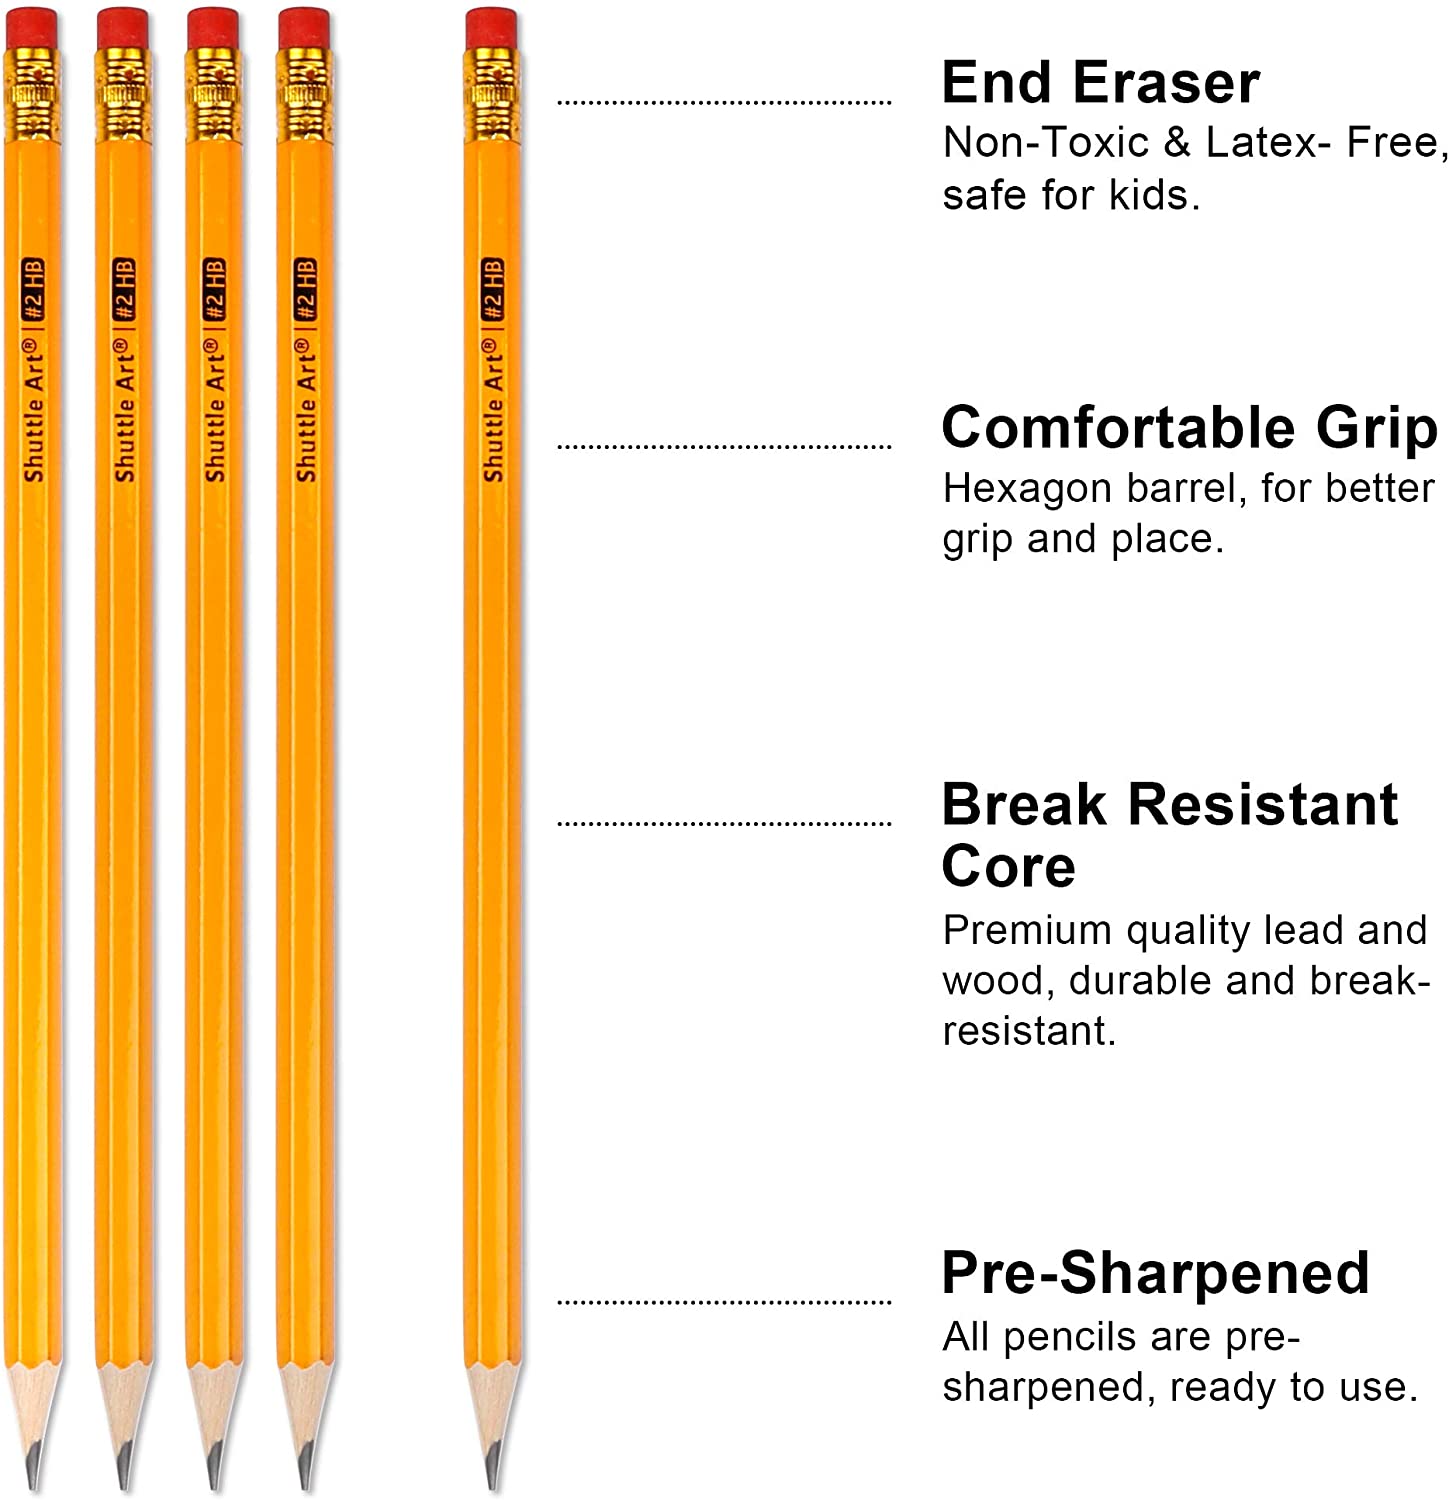 Wood-Cased #2 HB Pencils, Shuttle Art 600 Pack Sharpened Yellow Pencils  with Erasers, Bulk Pack Graphite Pencils for School and Teacher Supplies,  Writhing, Drawing and Sketching 